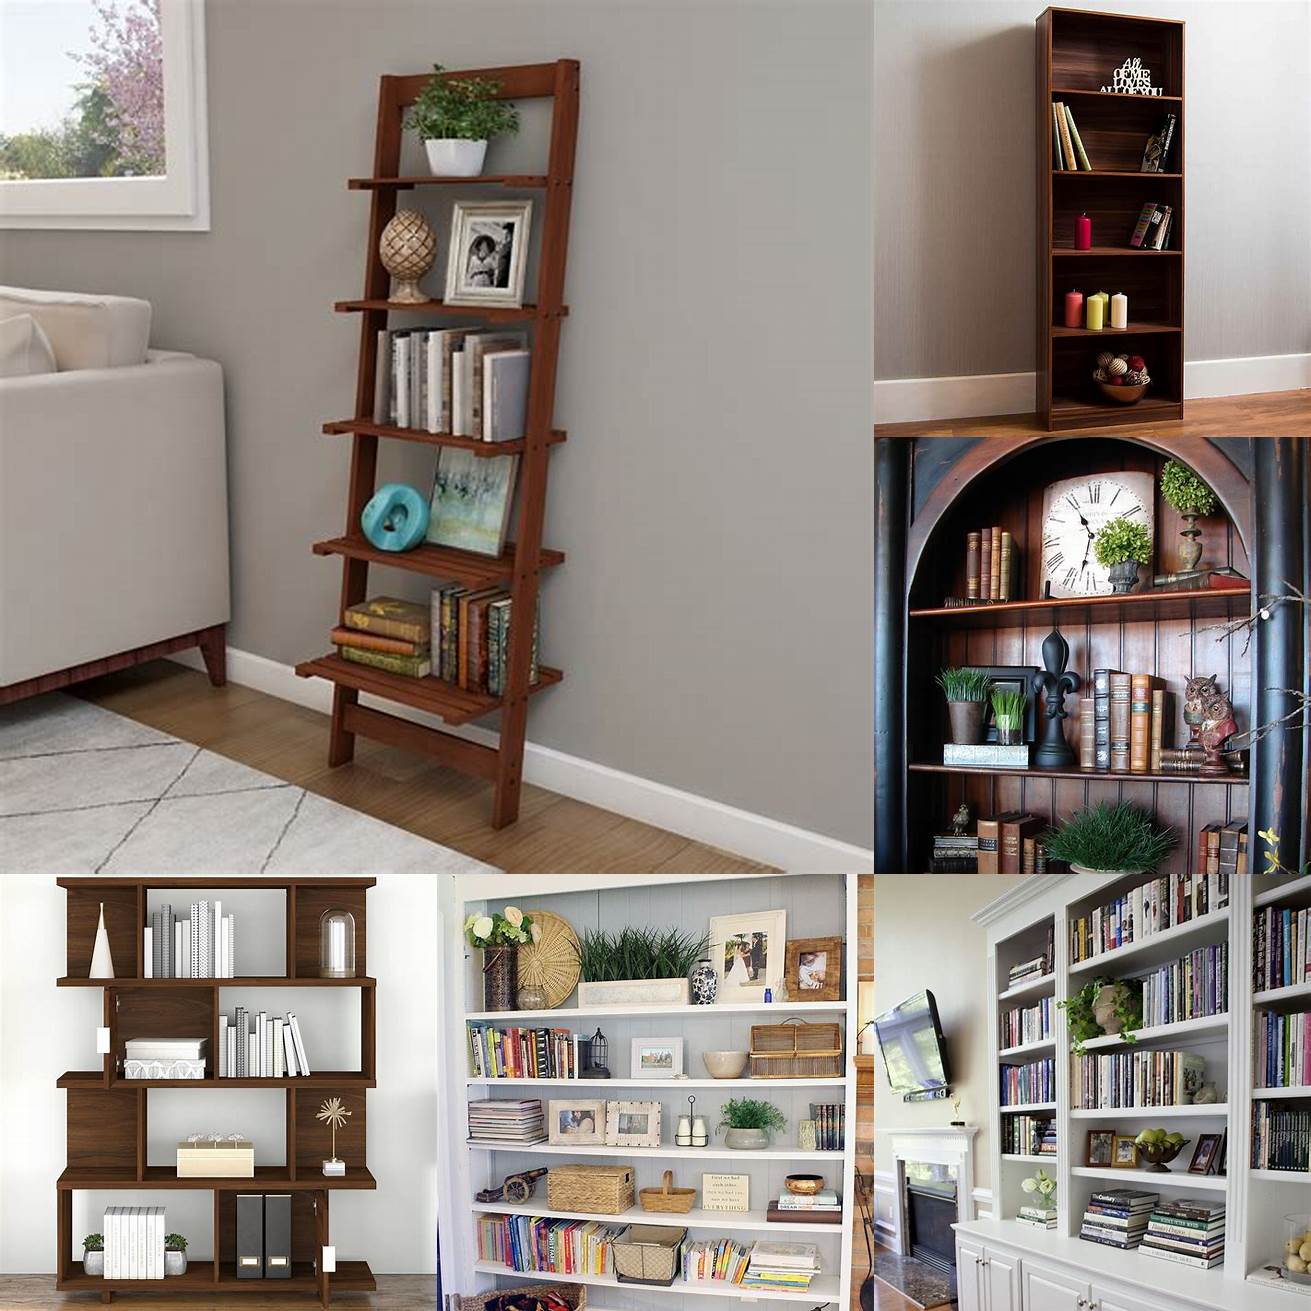 A walnut bookshelf can display your favorite books and decor items in style